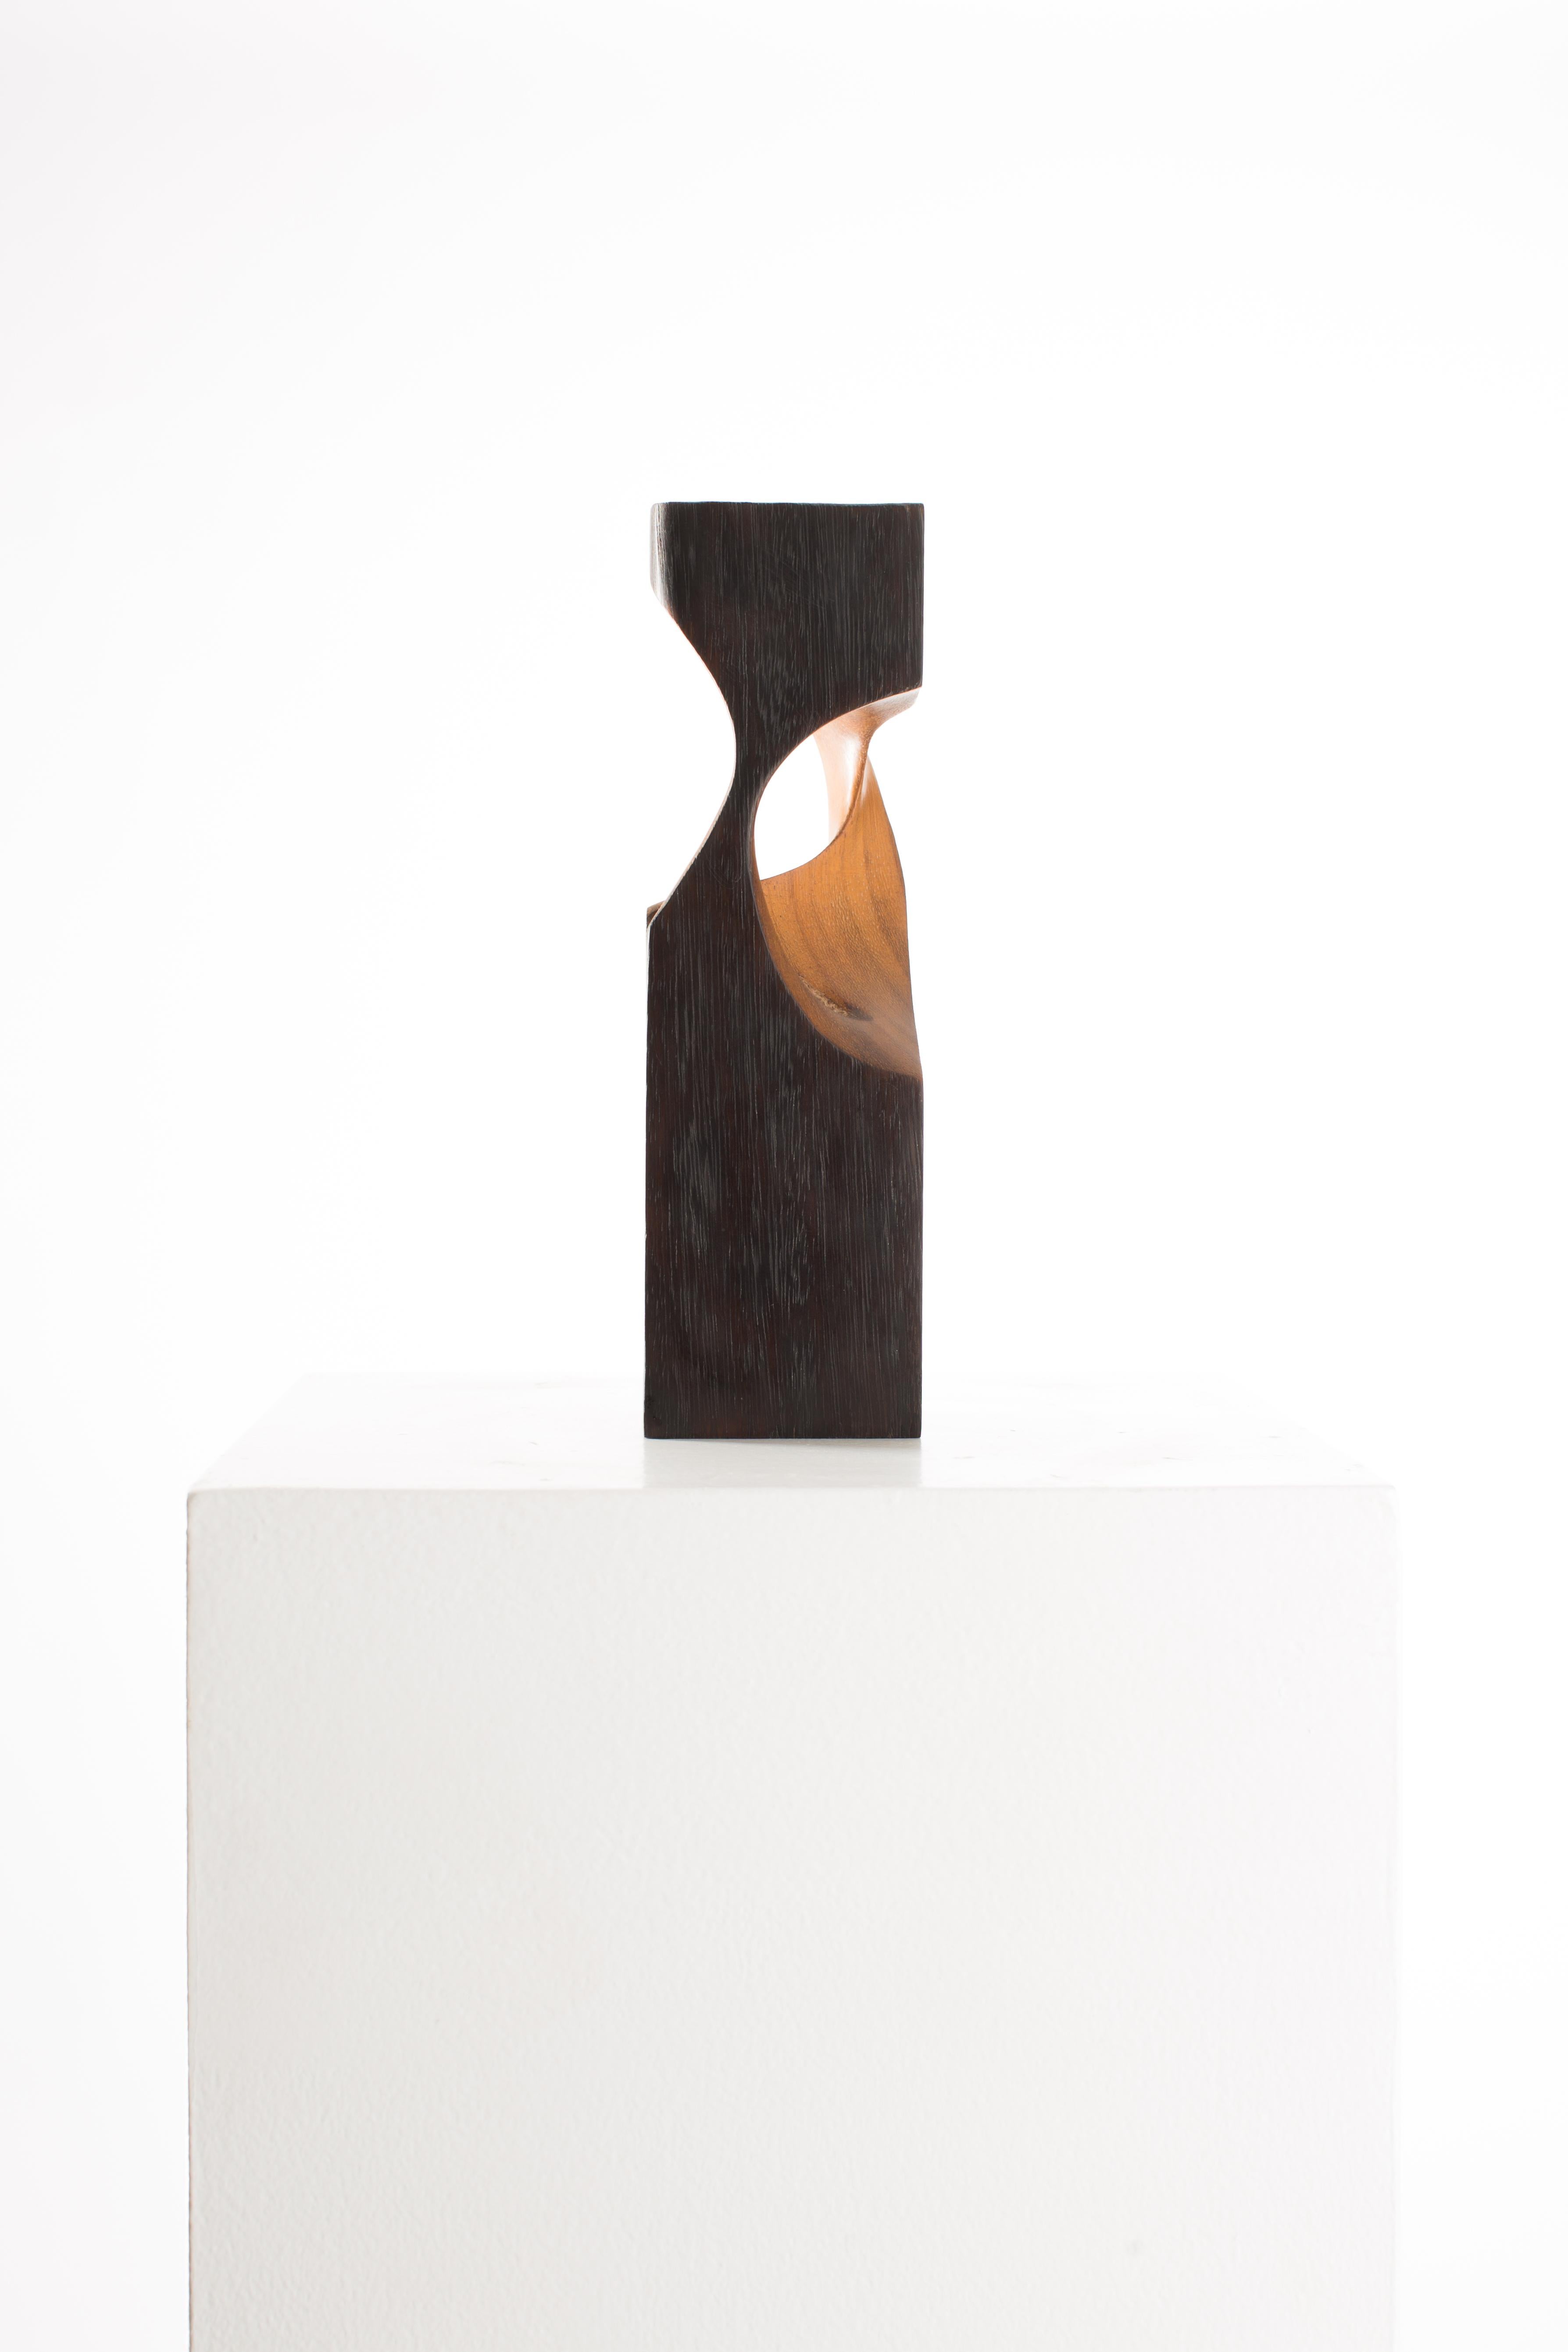 Black, Raw, Satin, Wood, Abstract, Contemporary, Modern, Sculpture - Brown Abstract Sculpture by Driaan Claassen